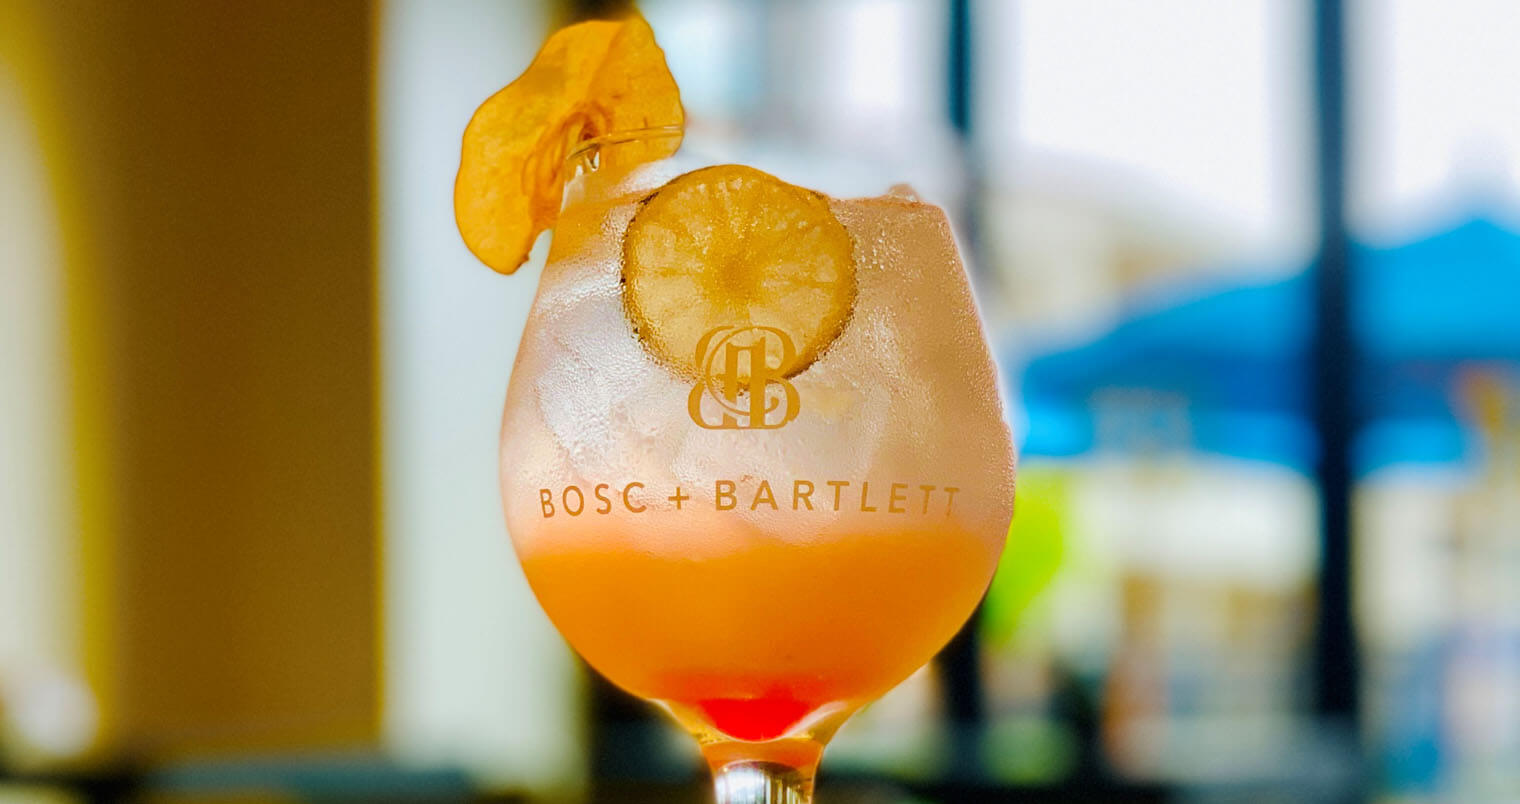 Who’s the Bosc, cocktail, featured image